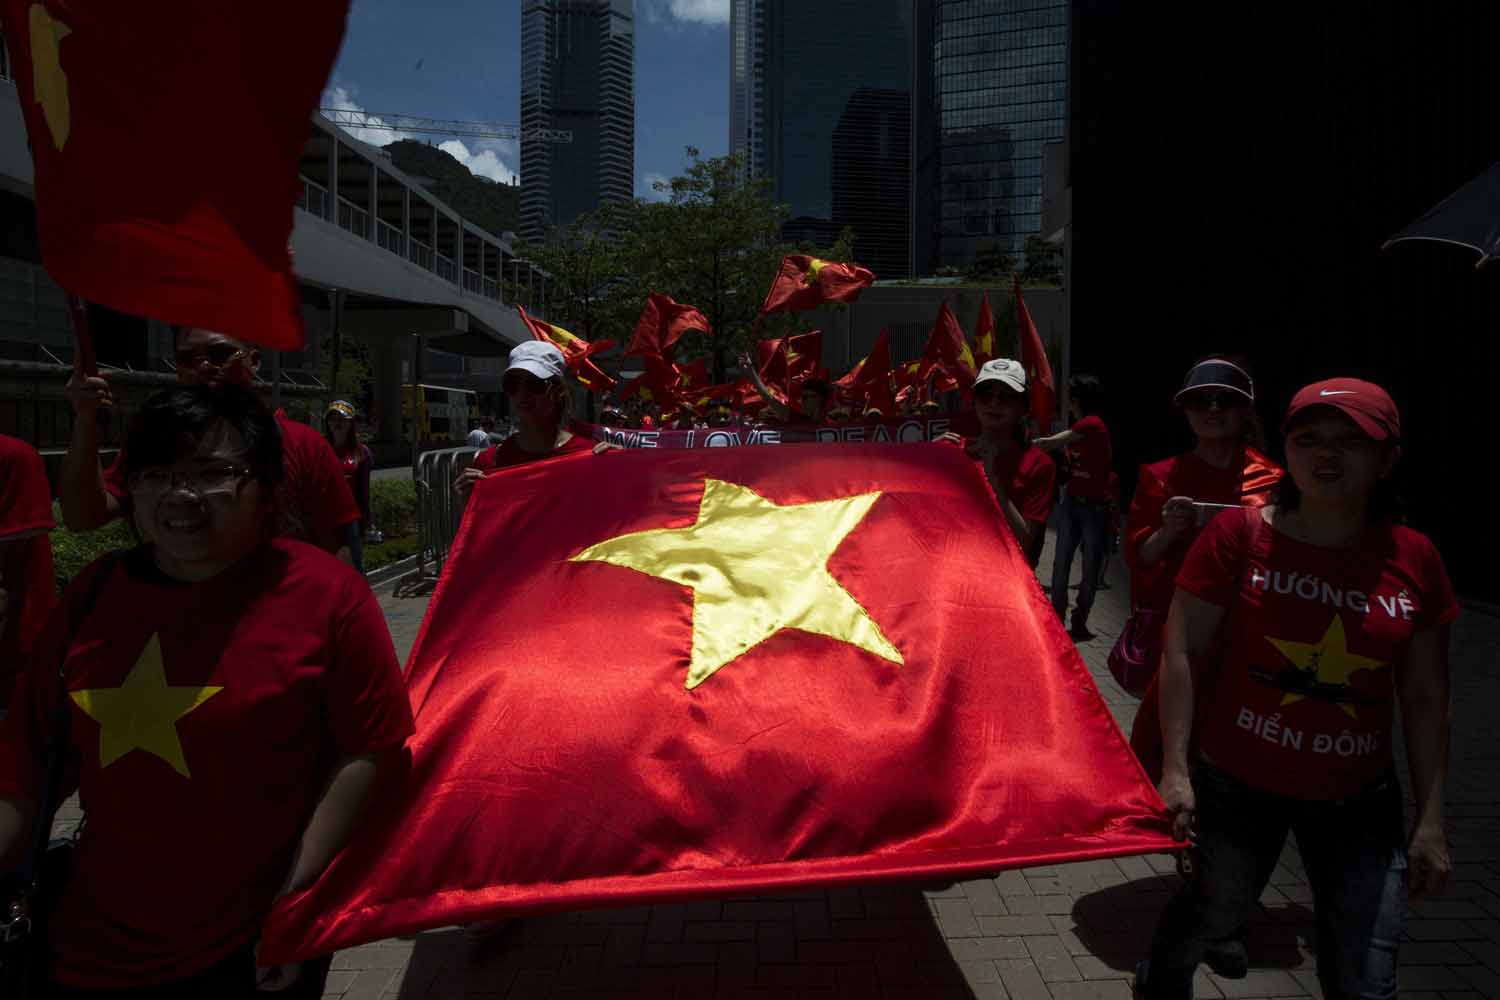 Hong Kong based Vietnamese demonstrators carry Vietnam's flag during a protest against China's territory claim in Hong Kong